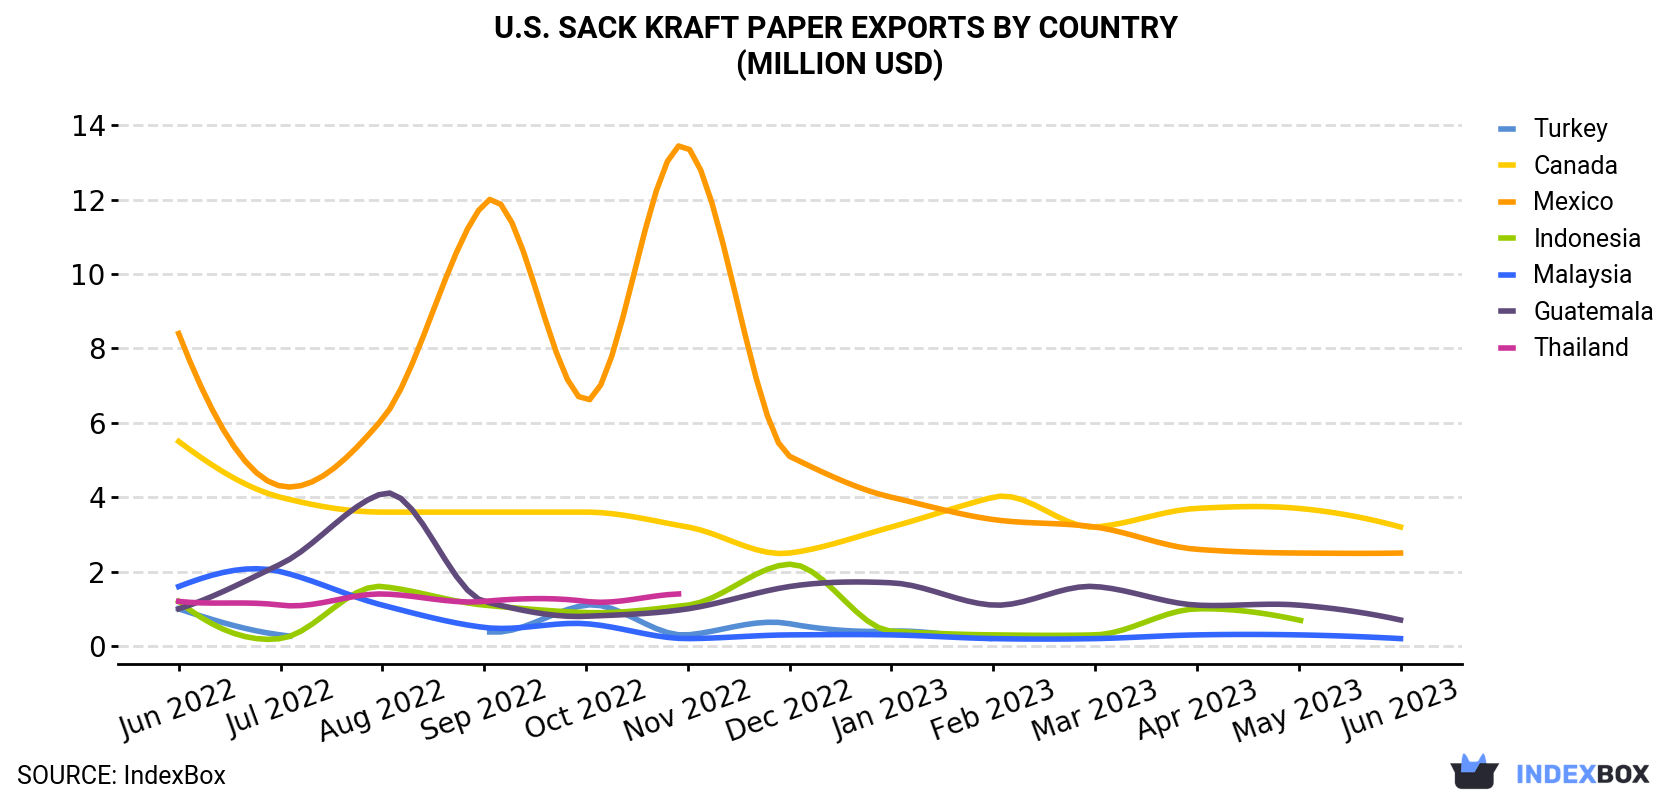 U.S. Sack Kraft Paper Exports By Country (Million USD)